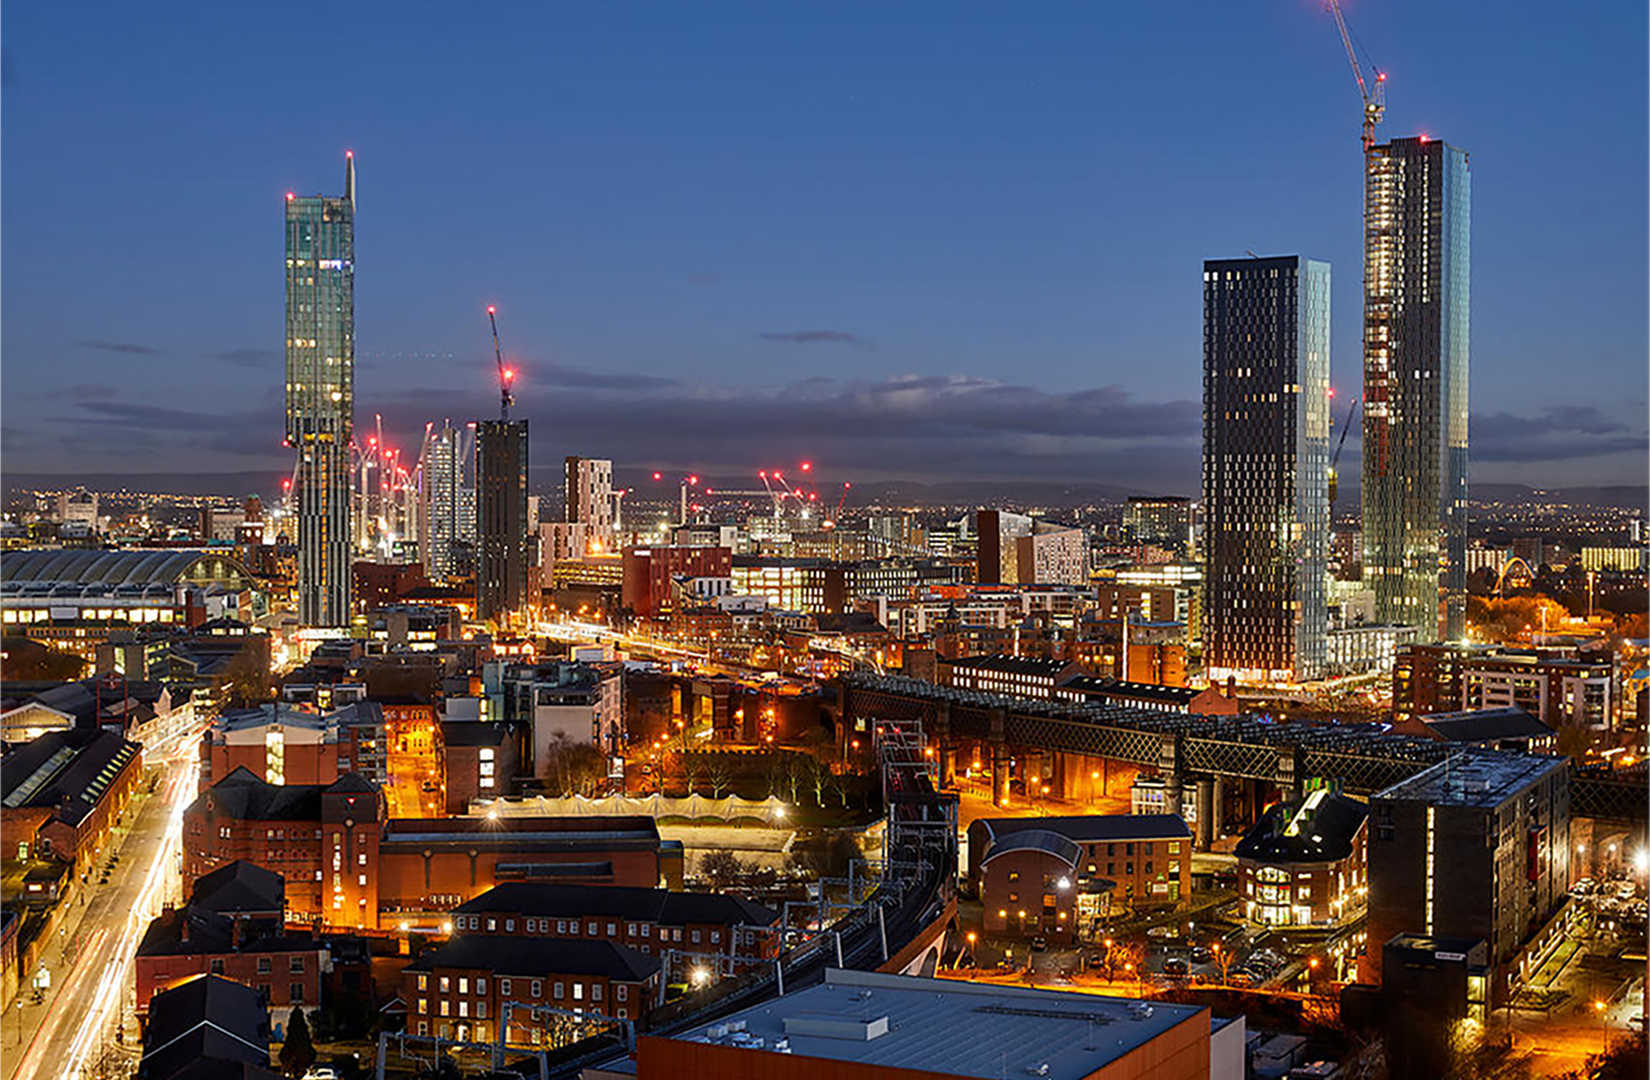 Skyline of Manchester to represent smart buildings